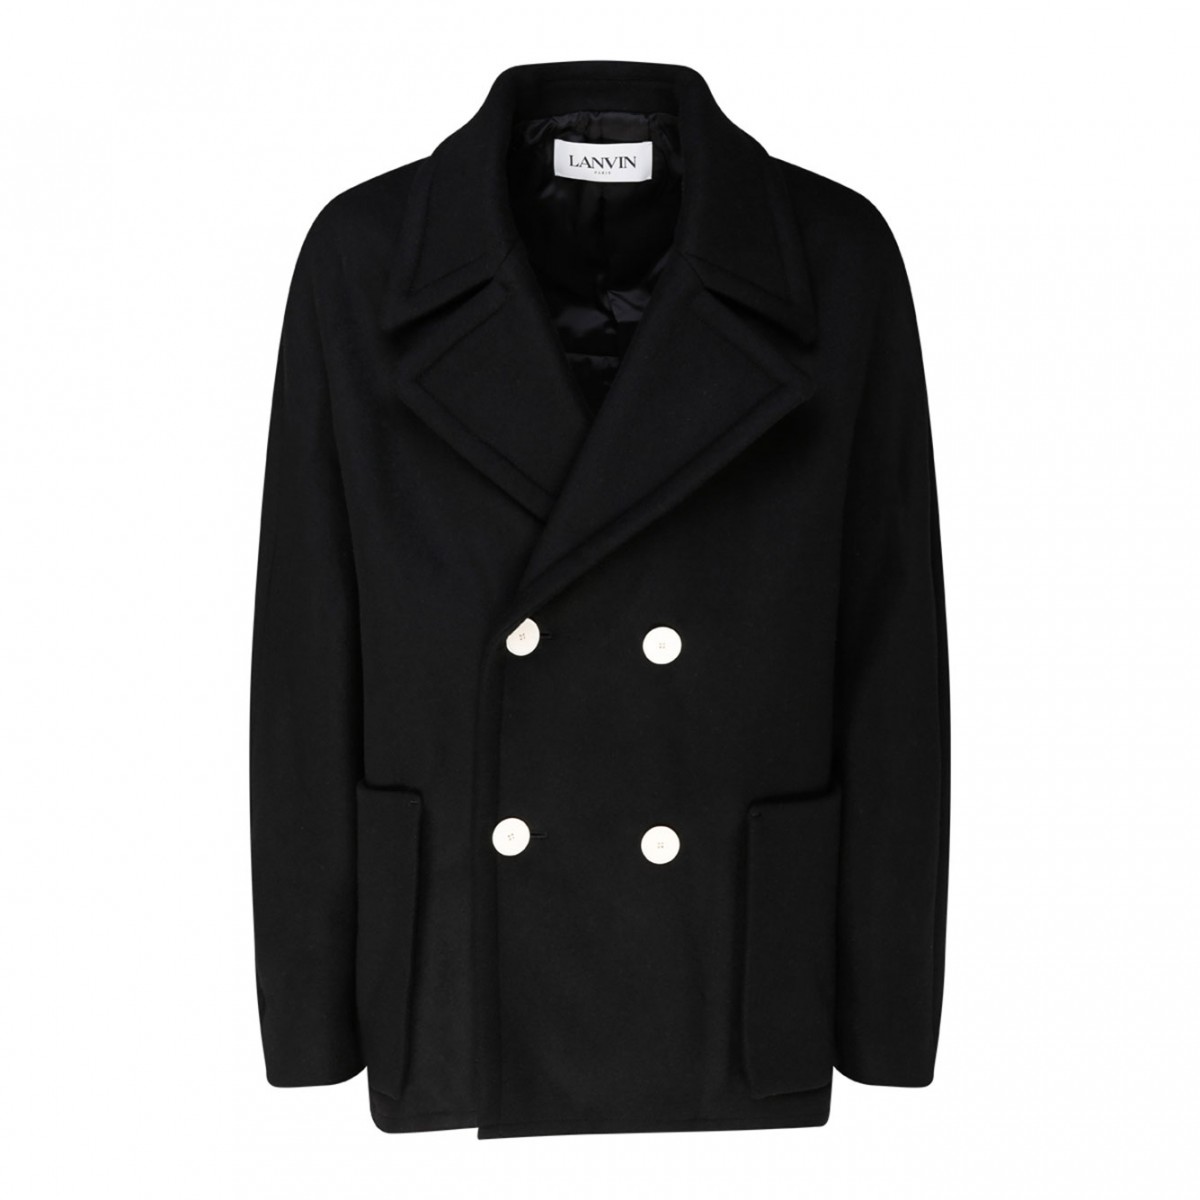 Lanvin Black Wool Double Breasted Coat| COLOGNESE 1882